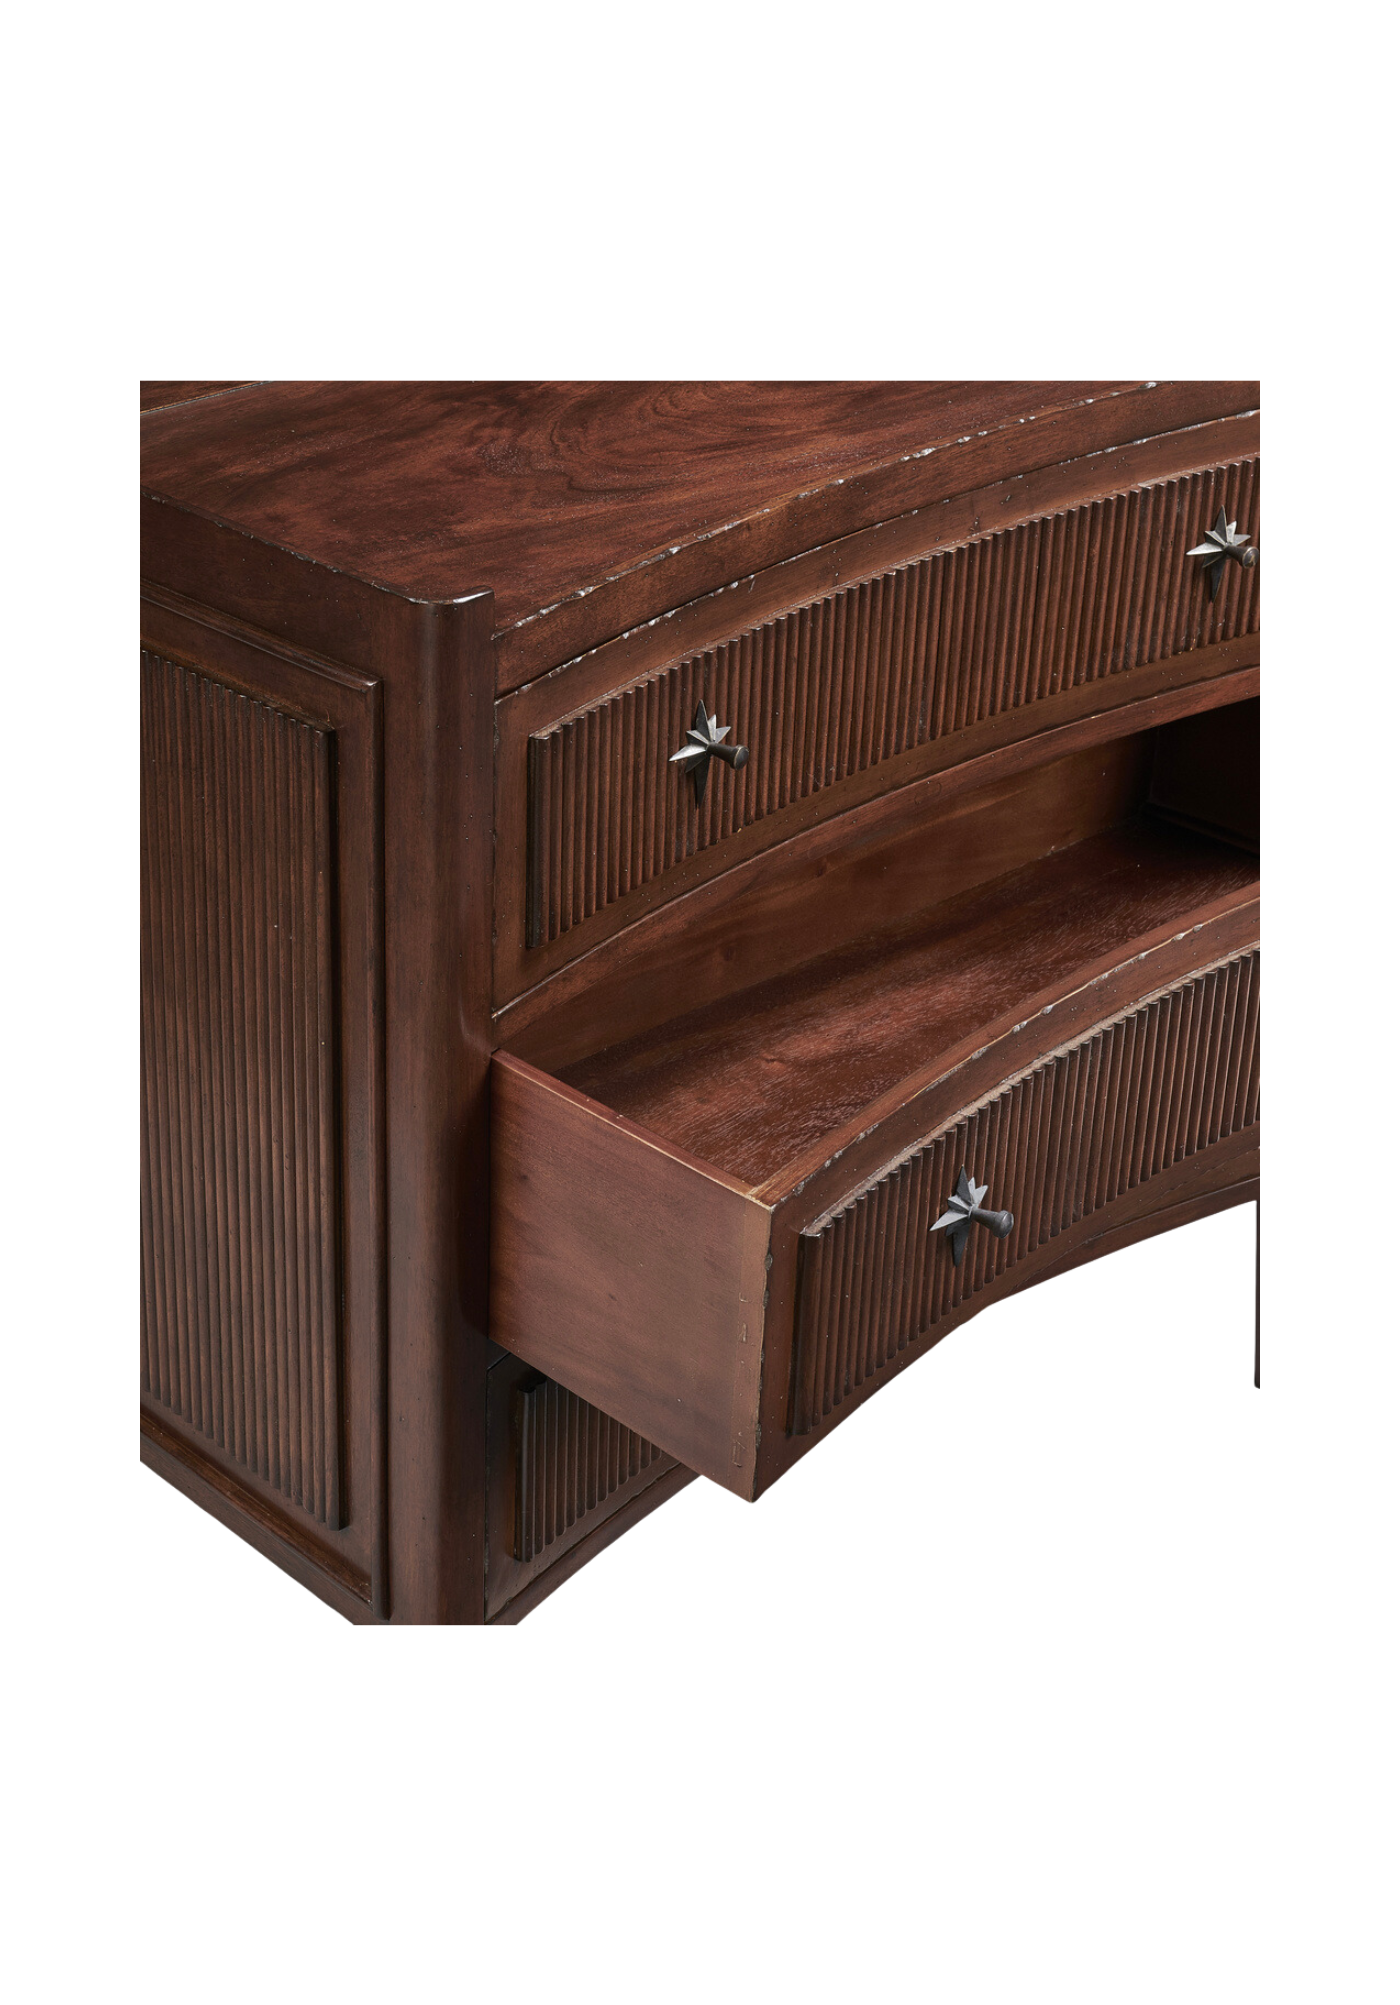 Florence Chest